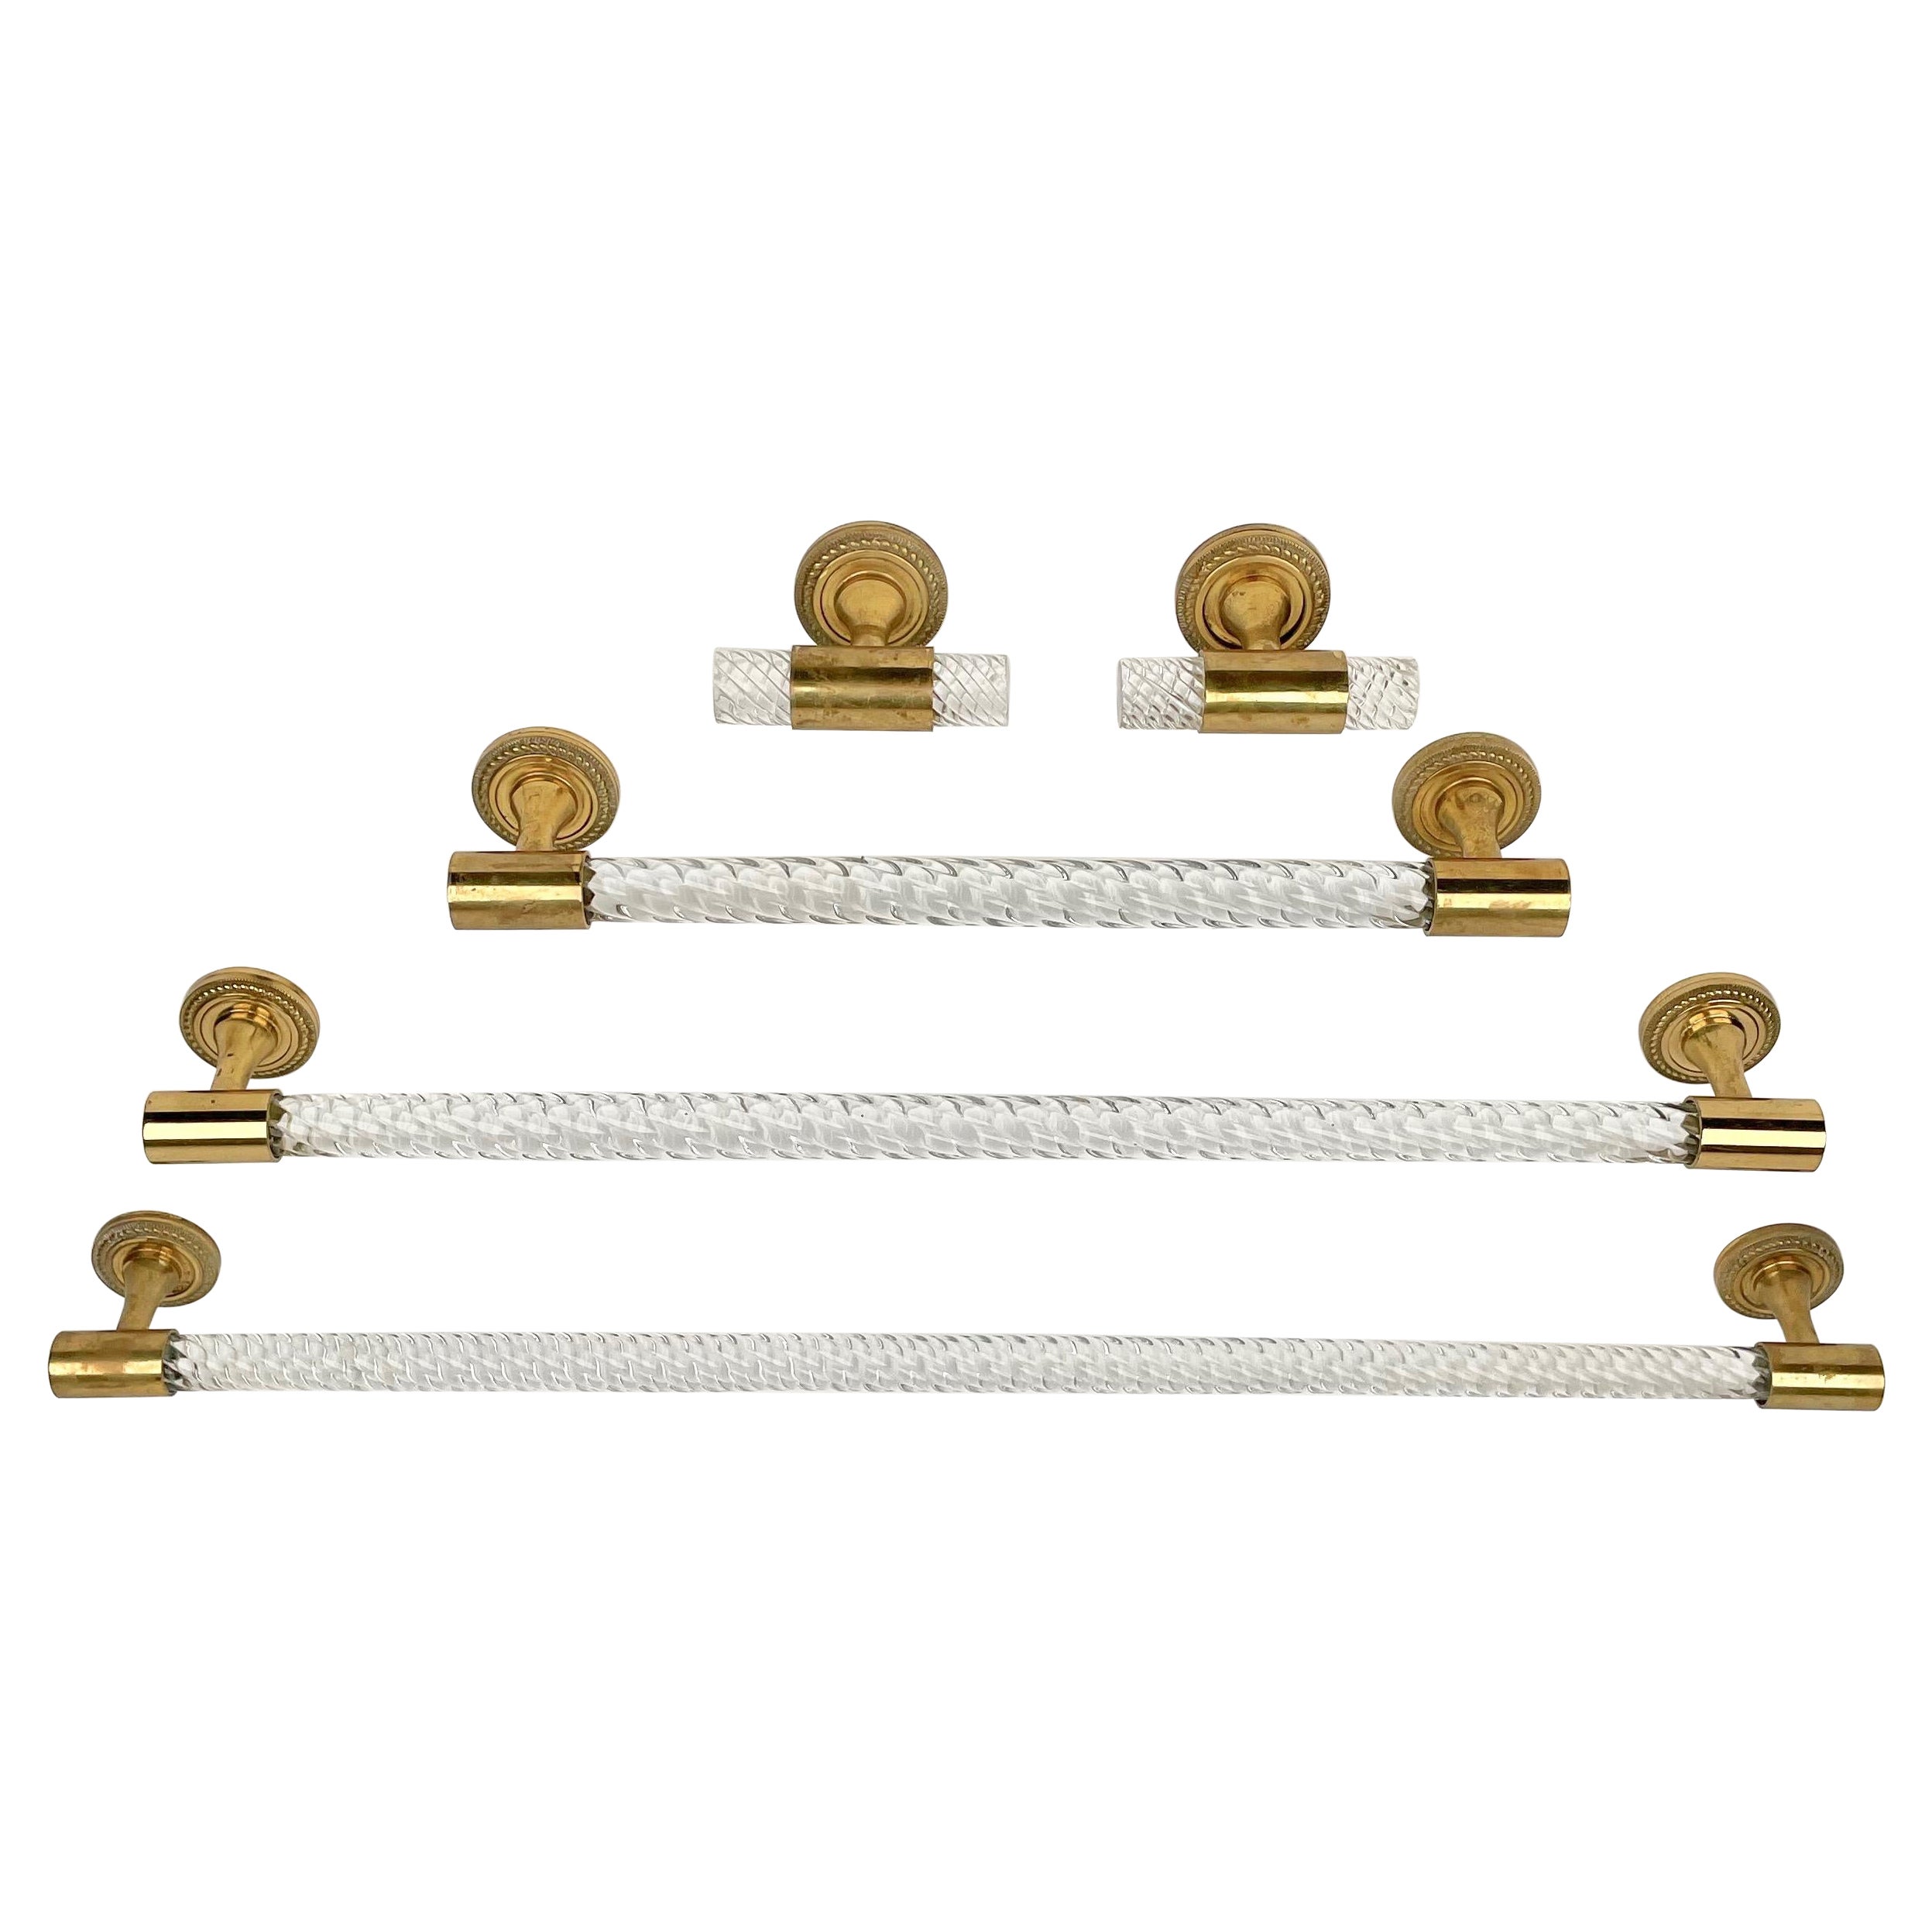 Bathroom Set of Murano Glass & Brass Towel Holder, Italy, 1950s For Sale